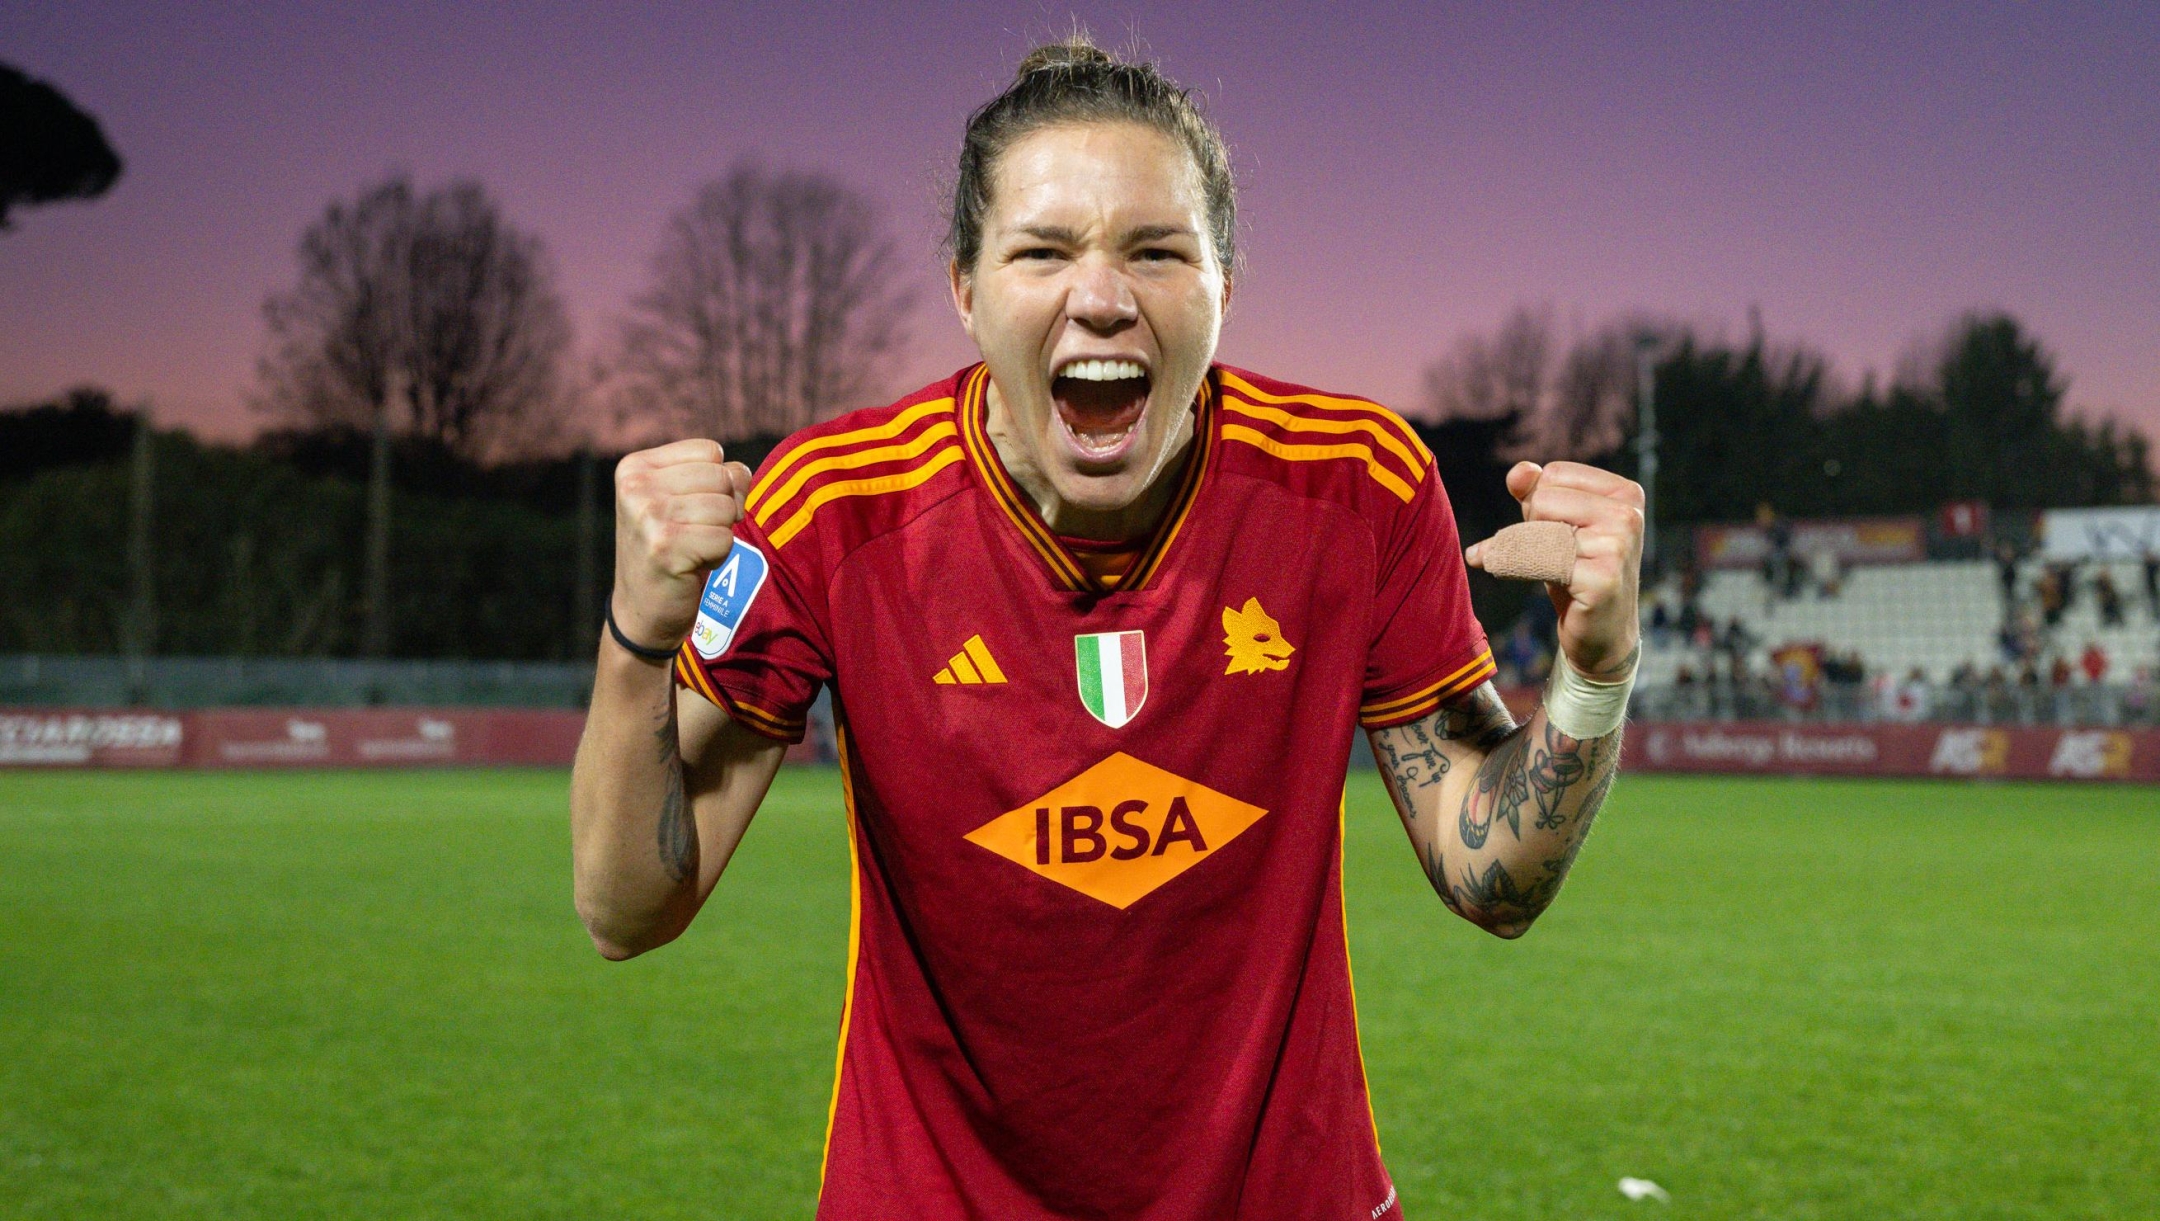 ROME, ITALY - FEBRUARY 04: AS Roma player Elena Linari celebrates the victory after the Women Serie A match between AS Roma and Juventus at Stadio Tre Fontane on February 04, 2024 in Rome, Italy. (Photo by Fabio Rossi/AS Roma via Getty Images)